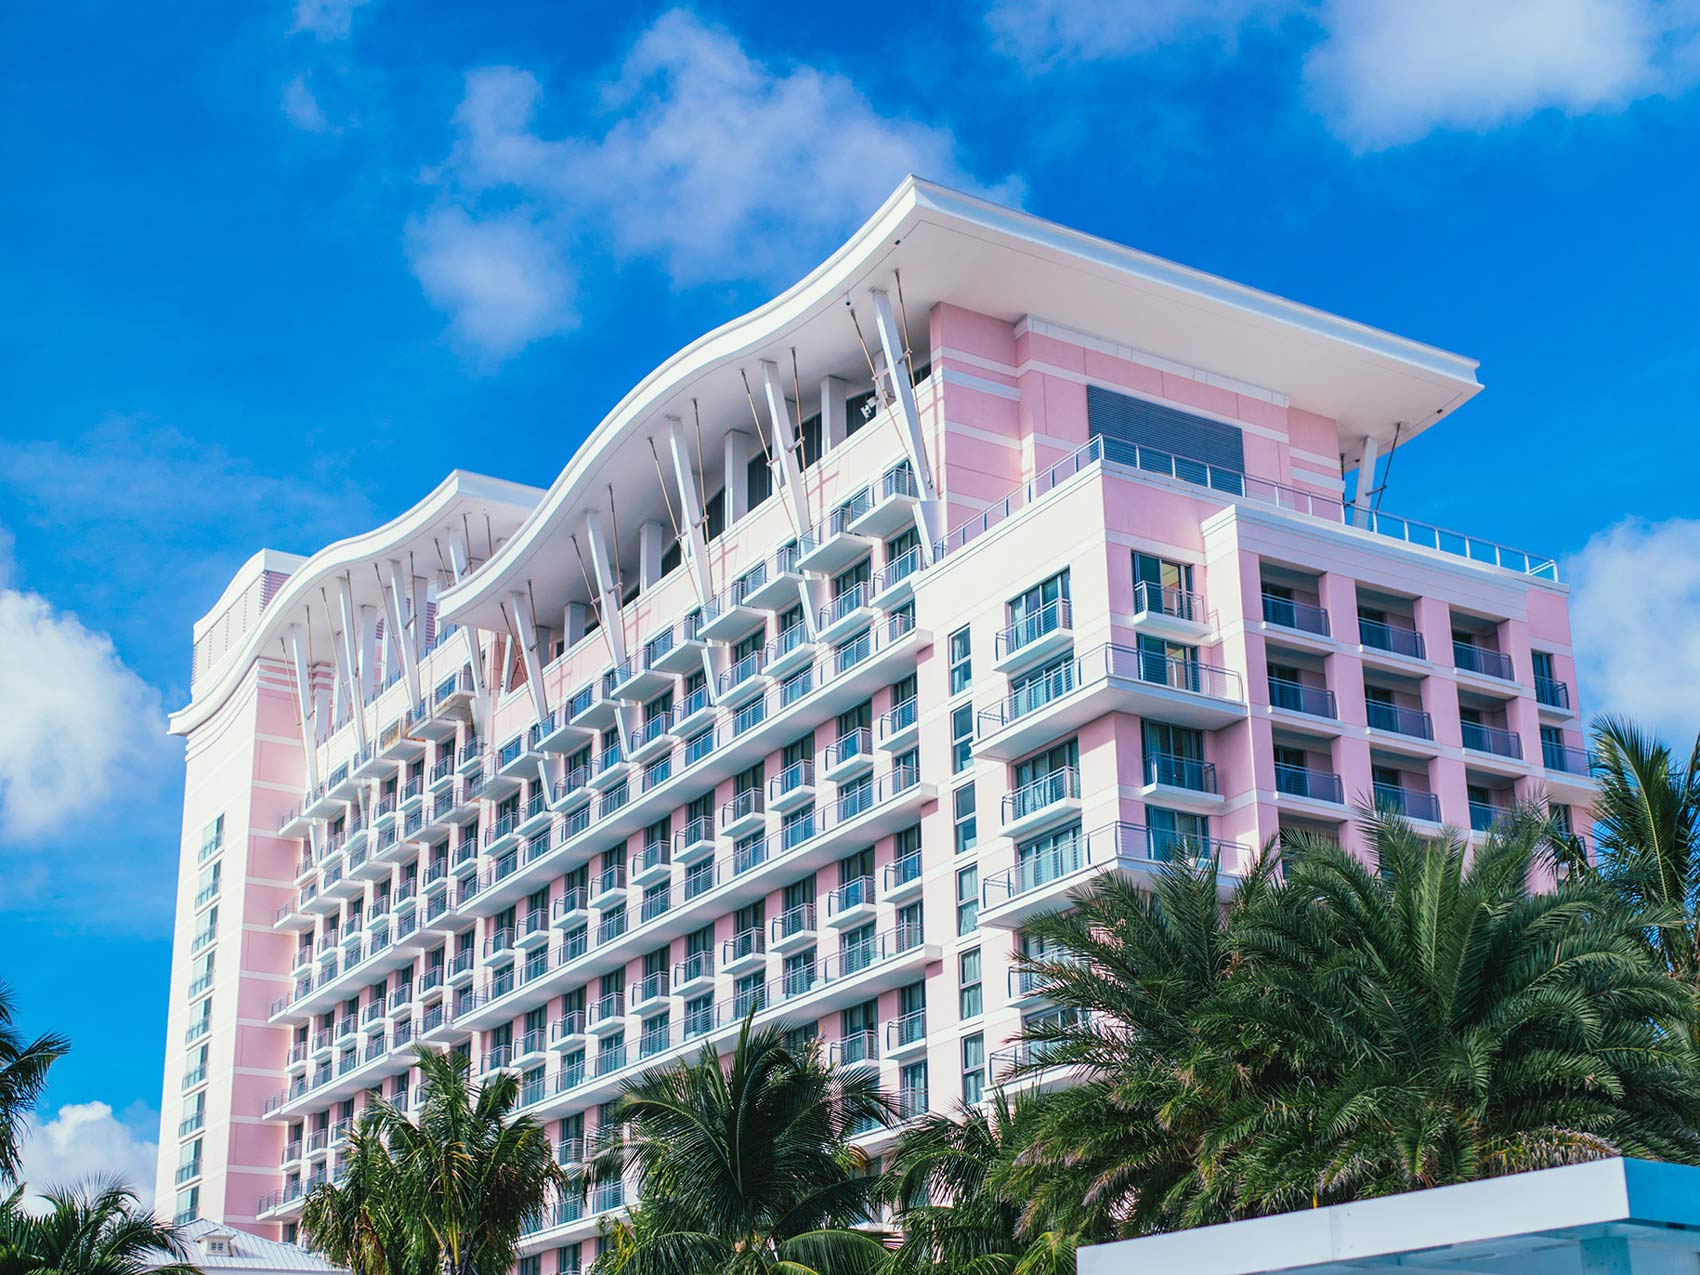 Exterior of a pink building, the SLS Baha Mar hotel, with blue skies in the background.